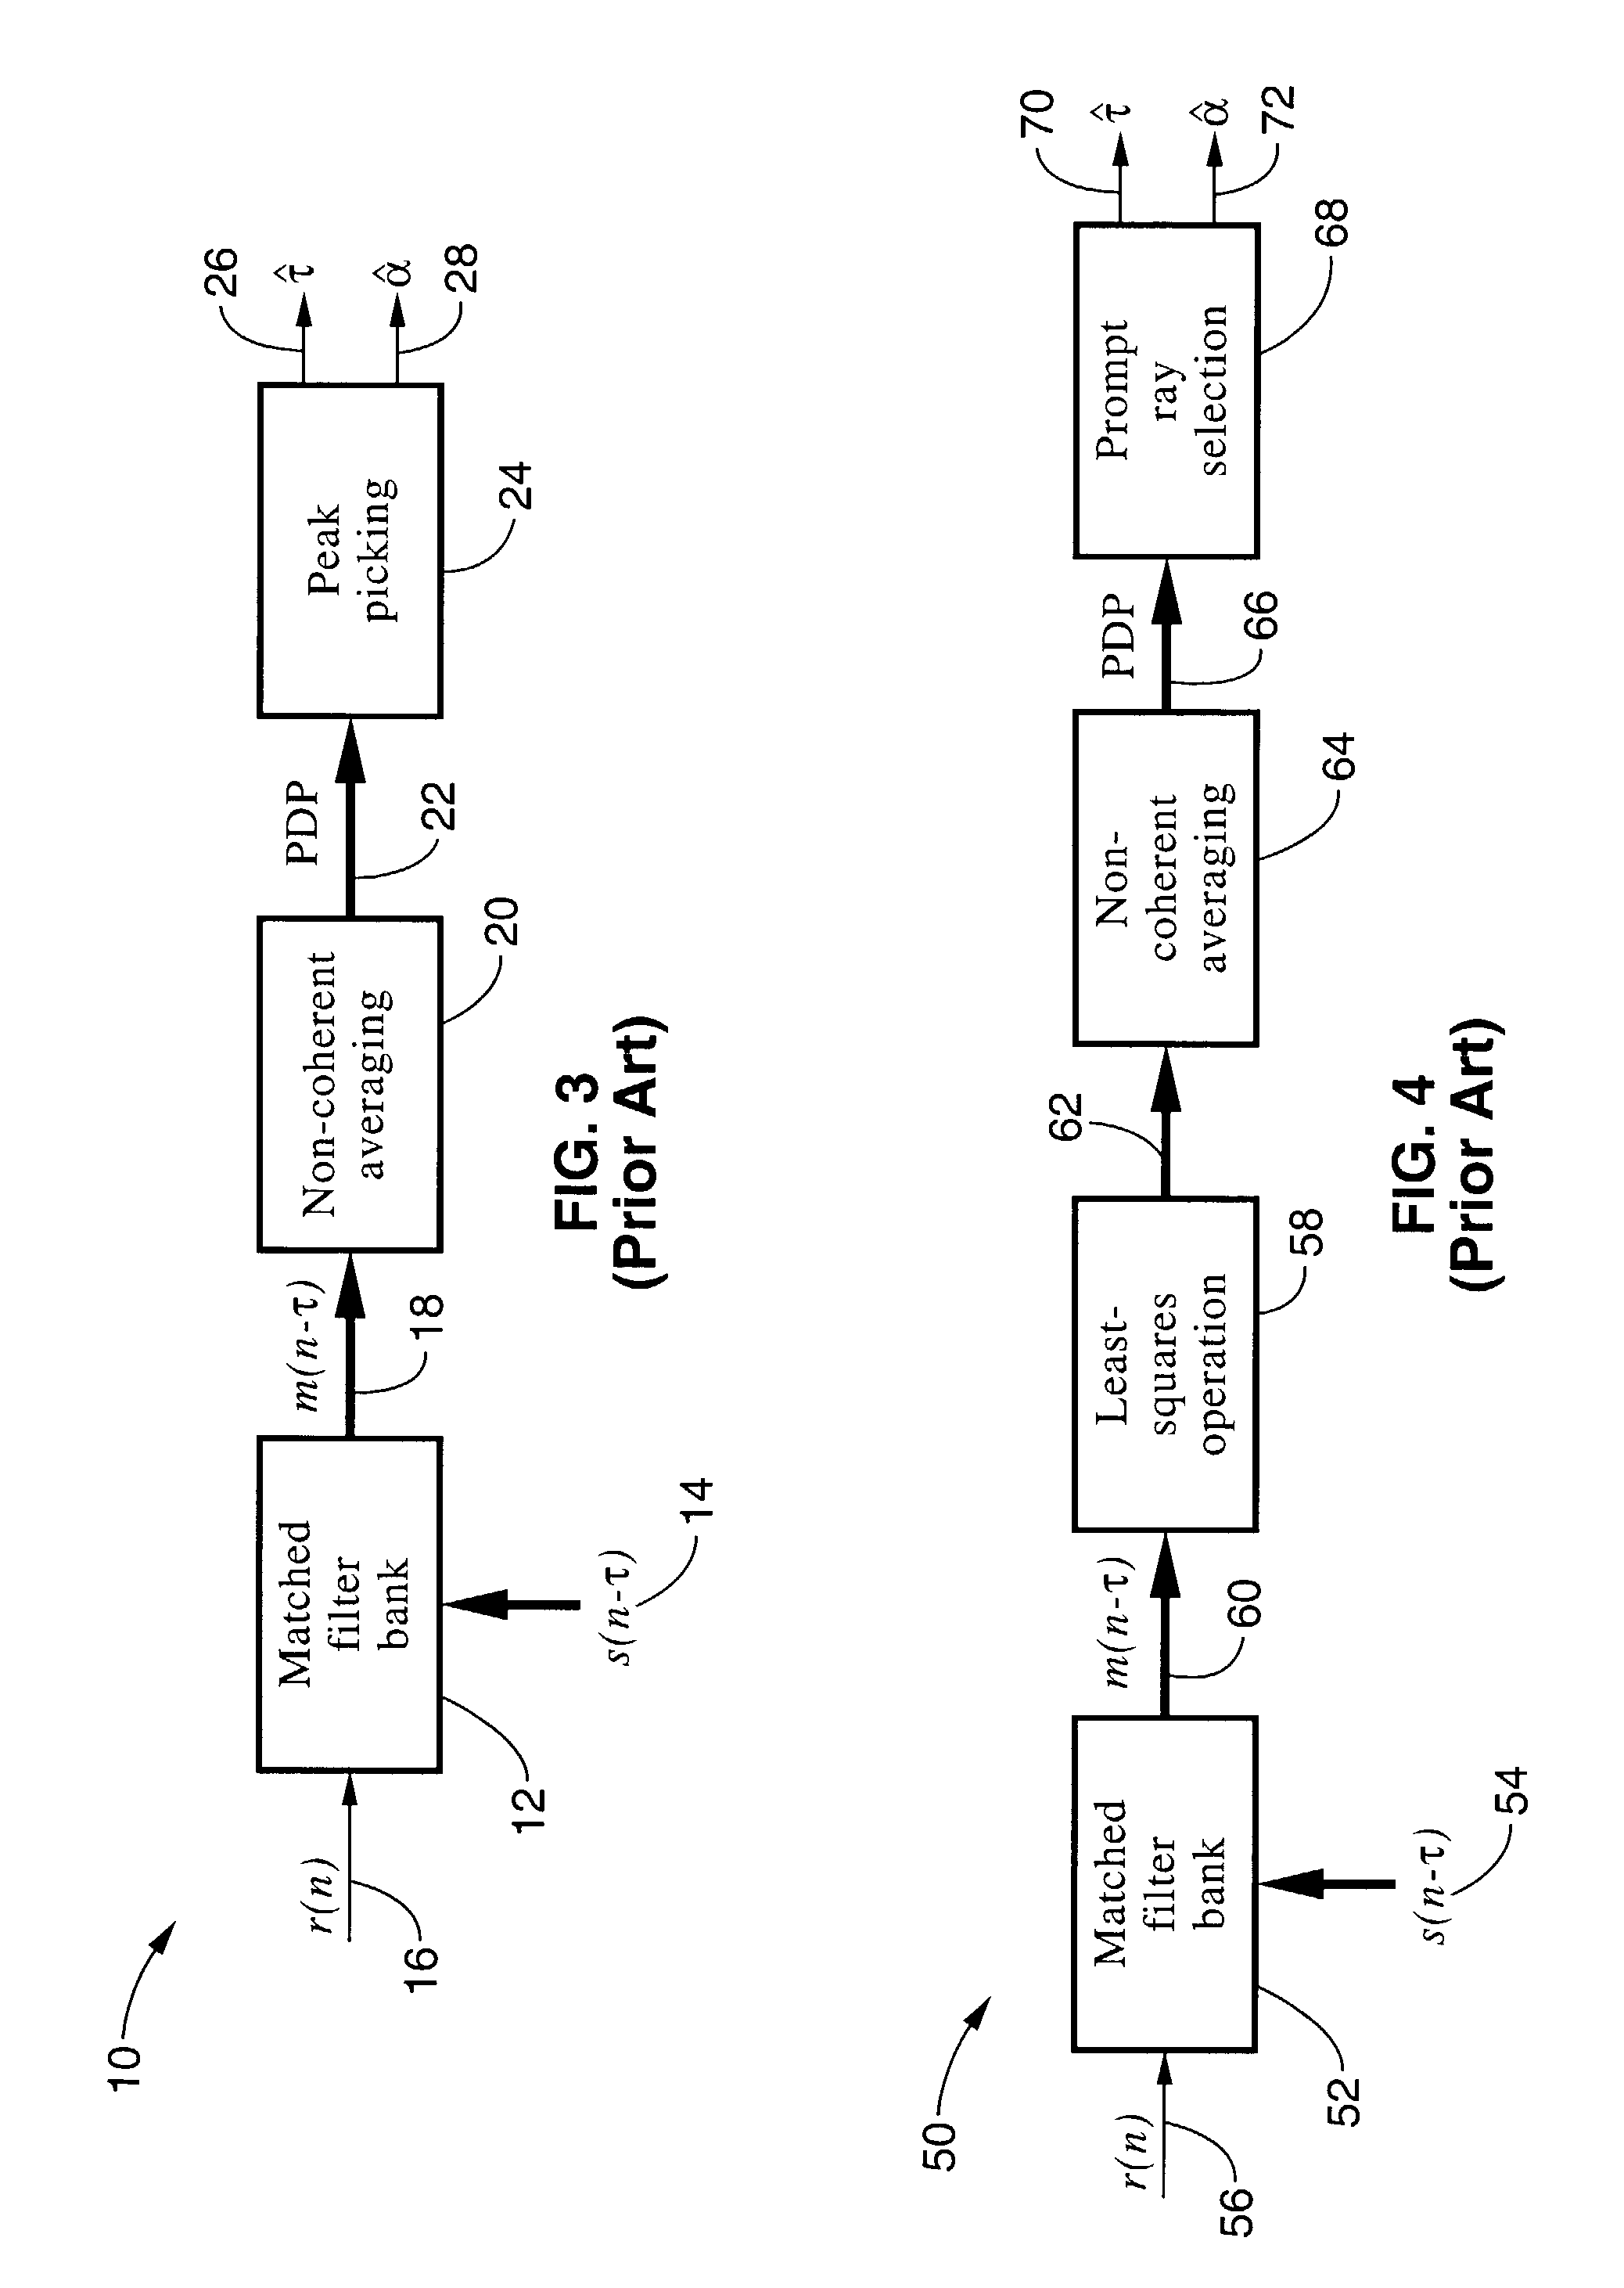 Method and apparatus for resolving multipath components for wireless location finding